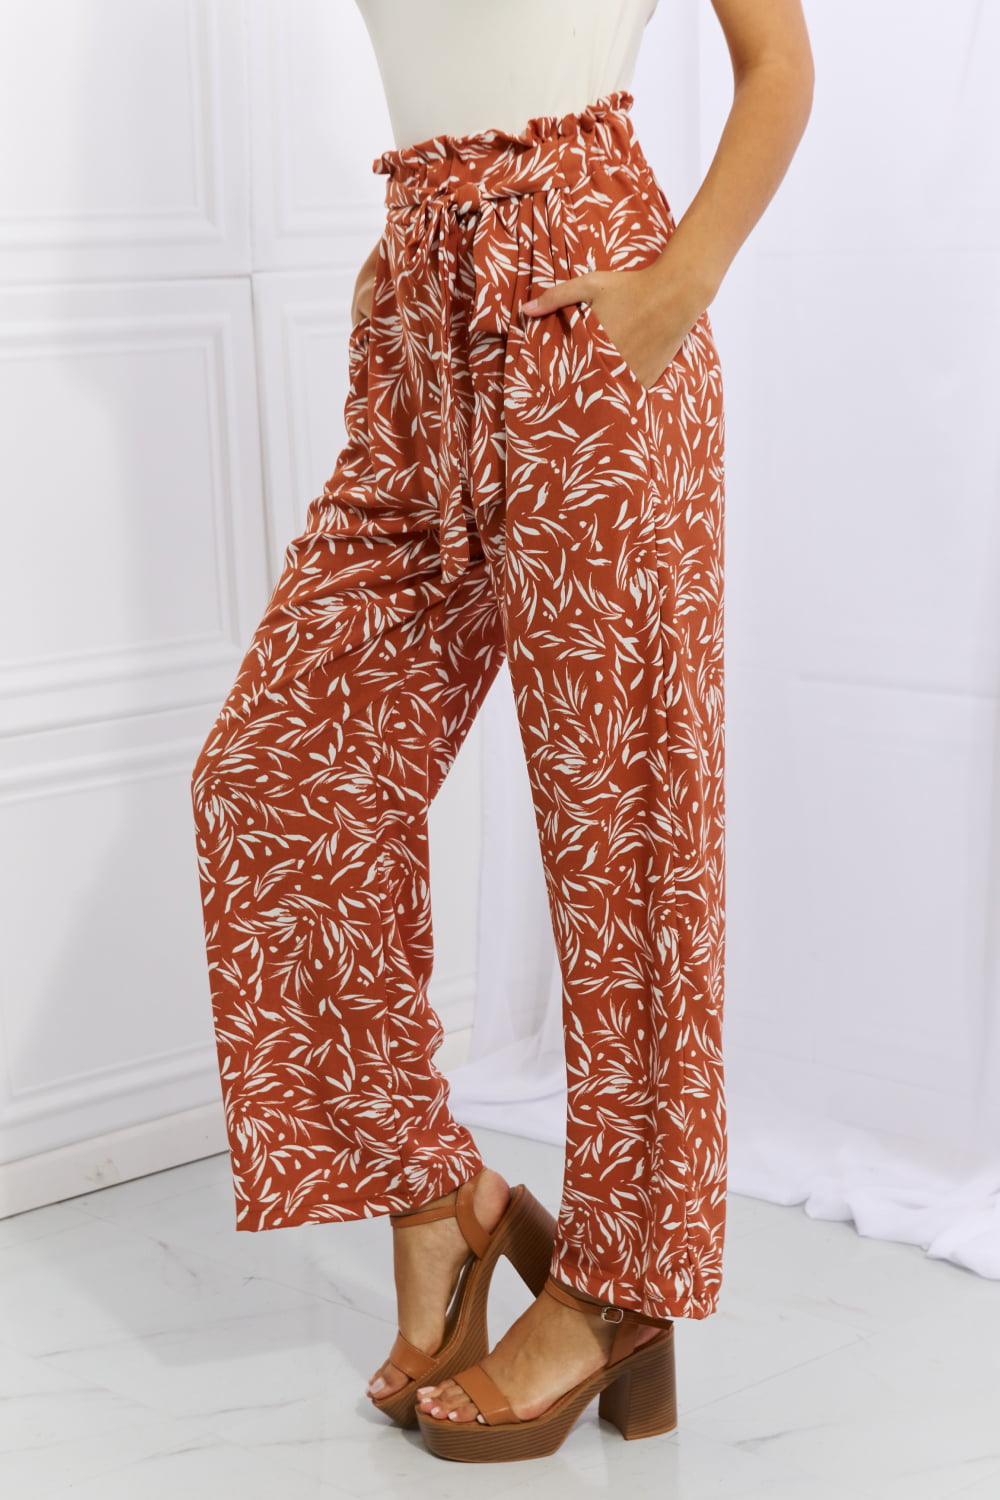 Heimish Right Angle Full Size Geometric Printed Pants in Red Orange - nailedmoms